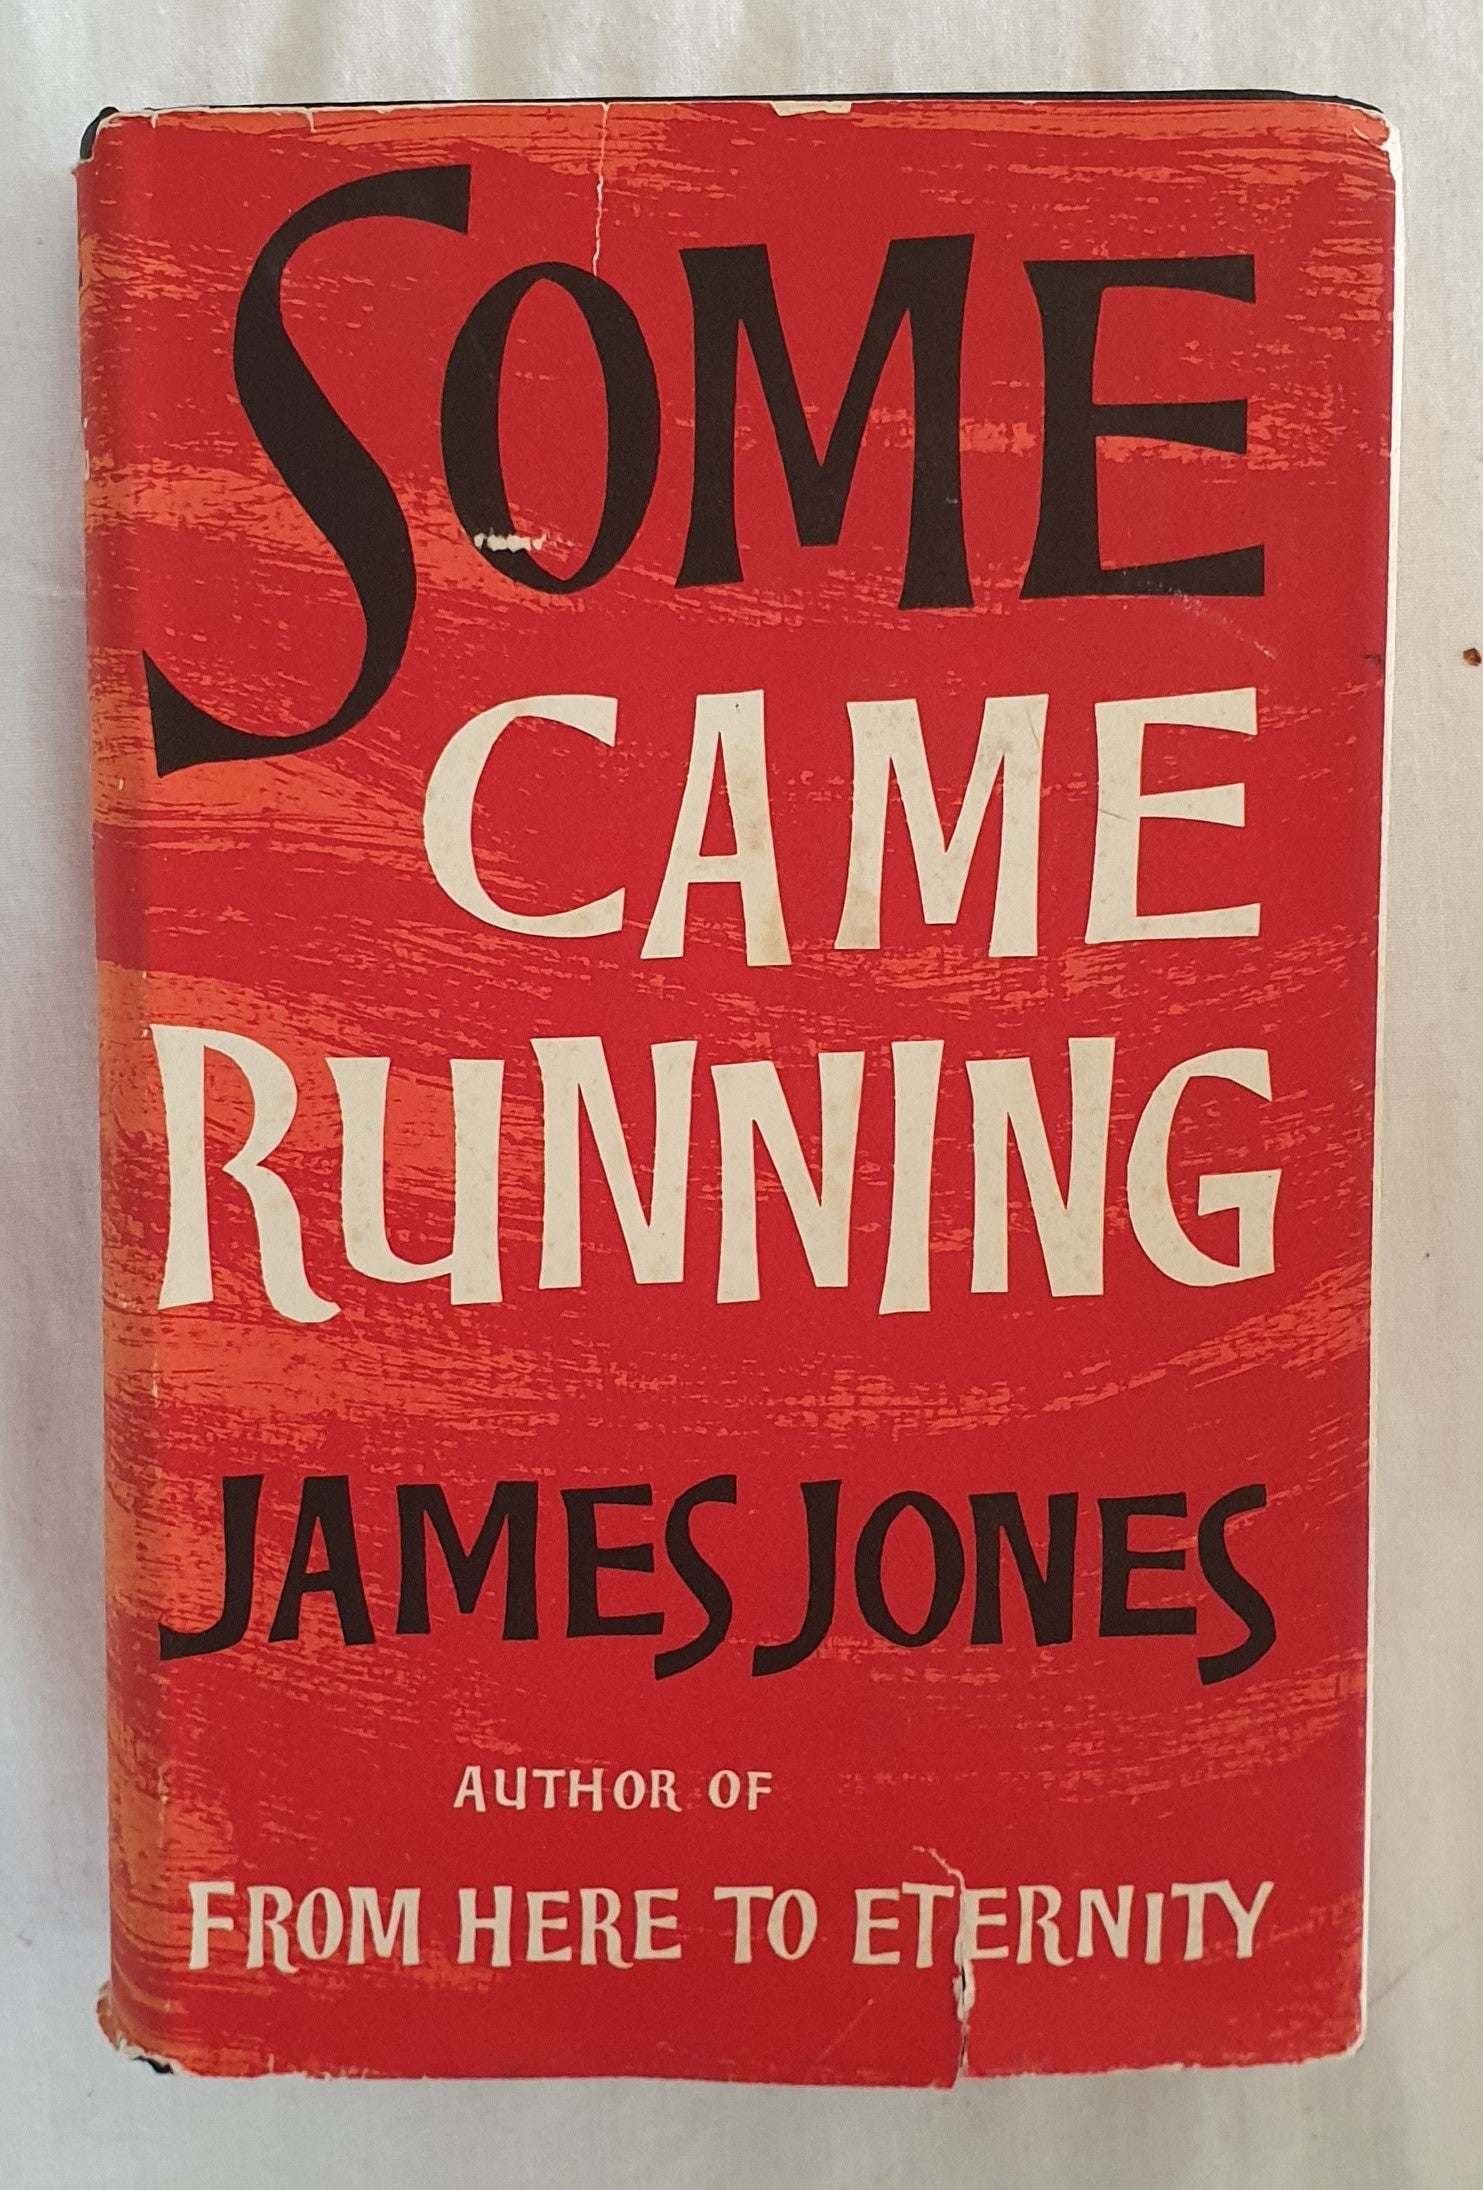 Some Came Running by James Jones